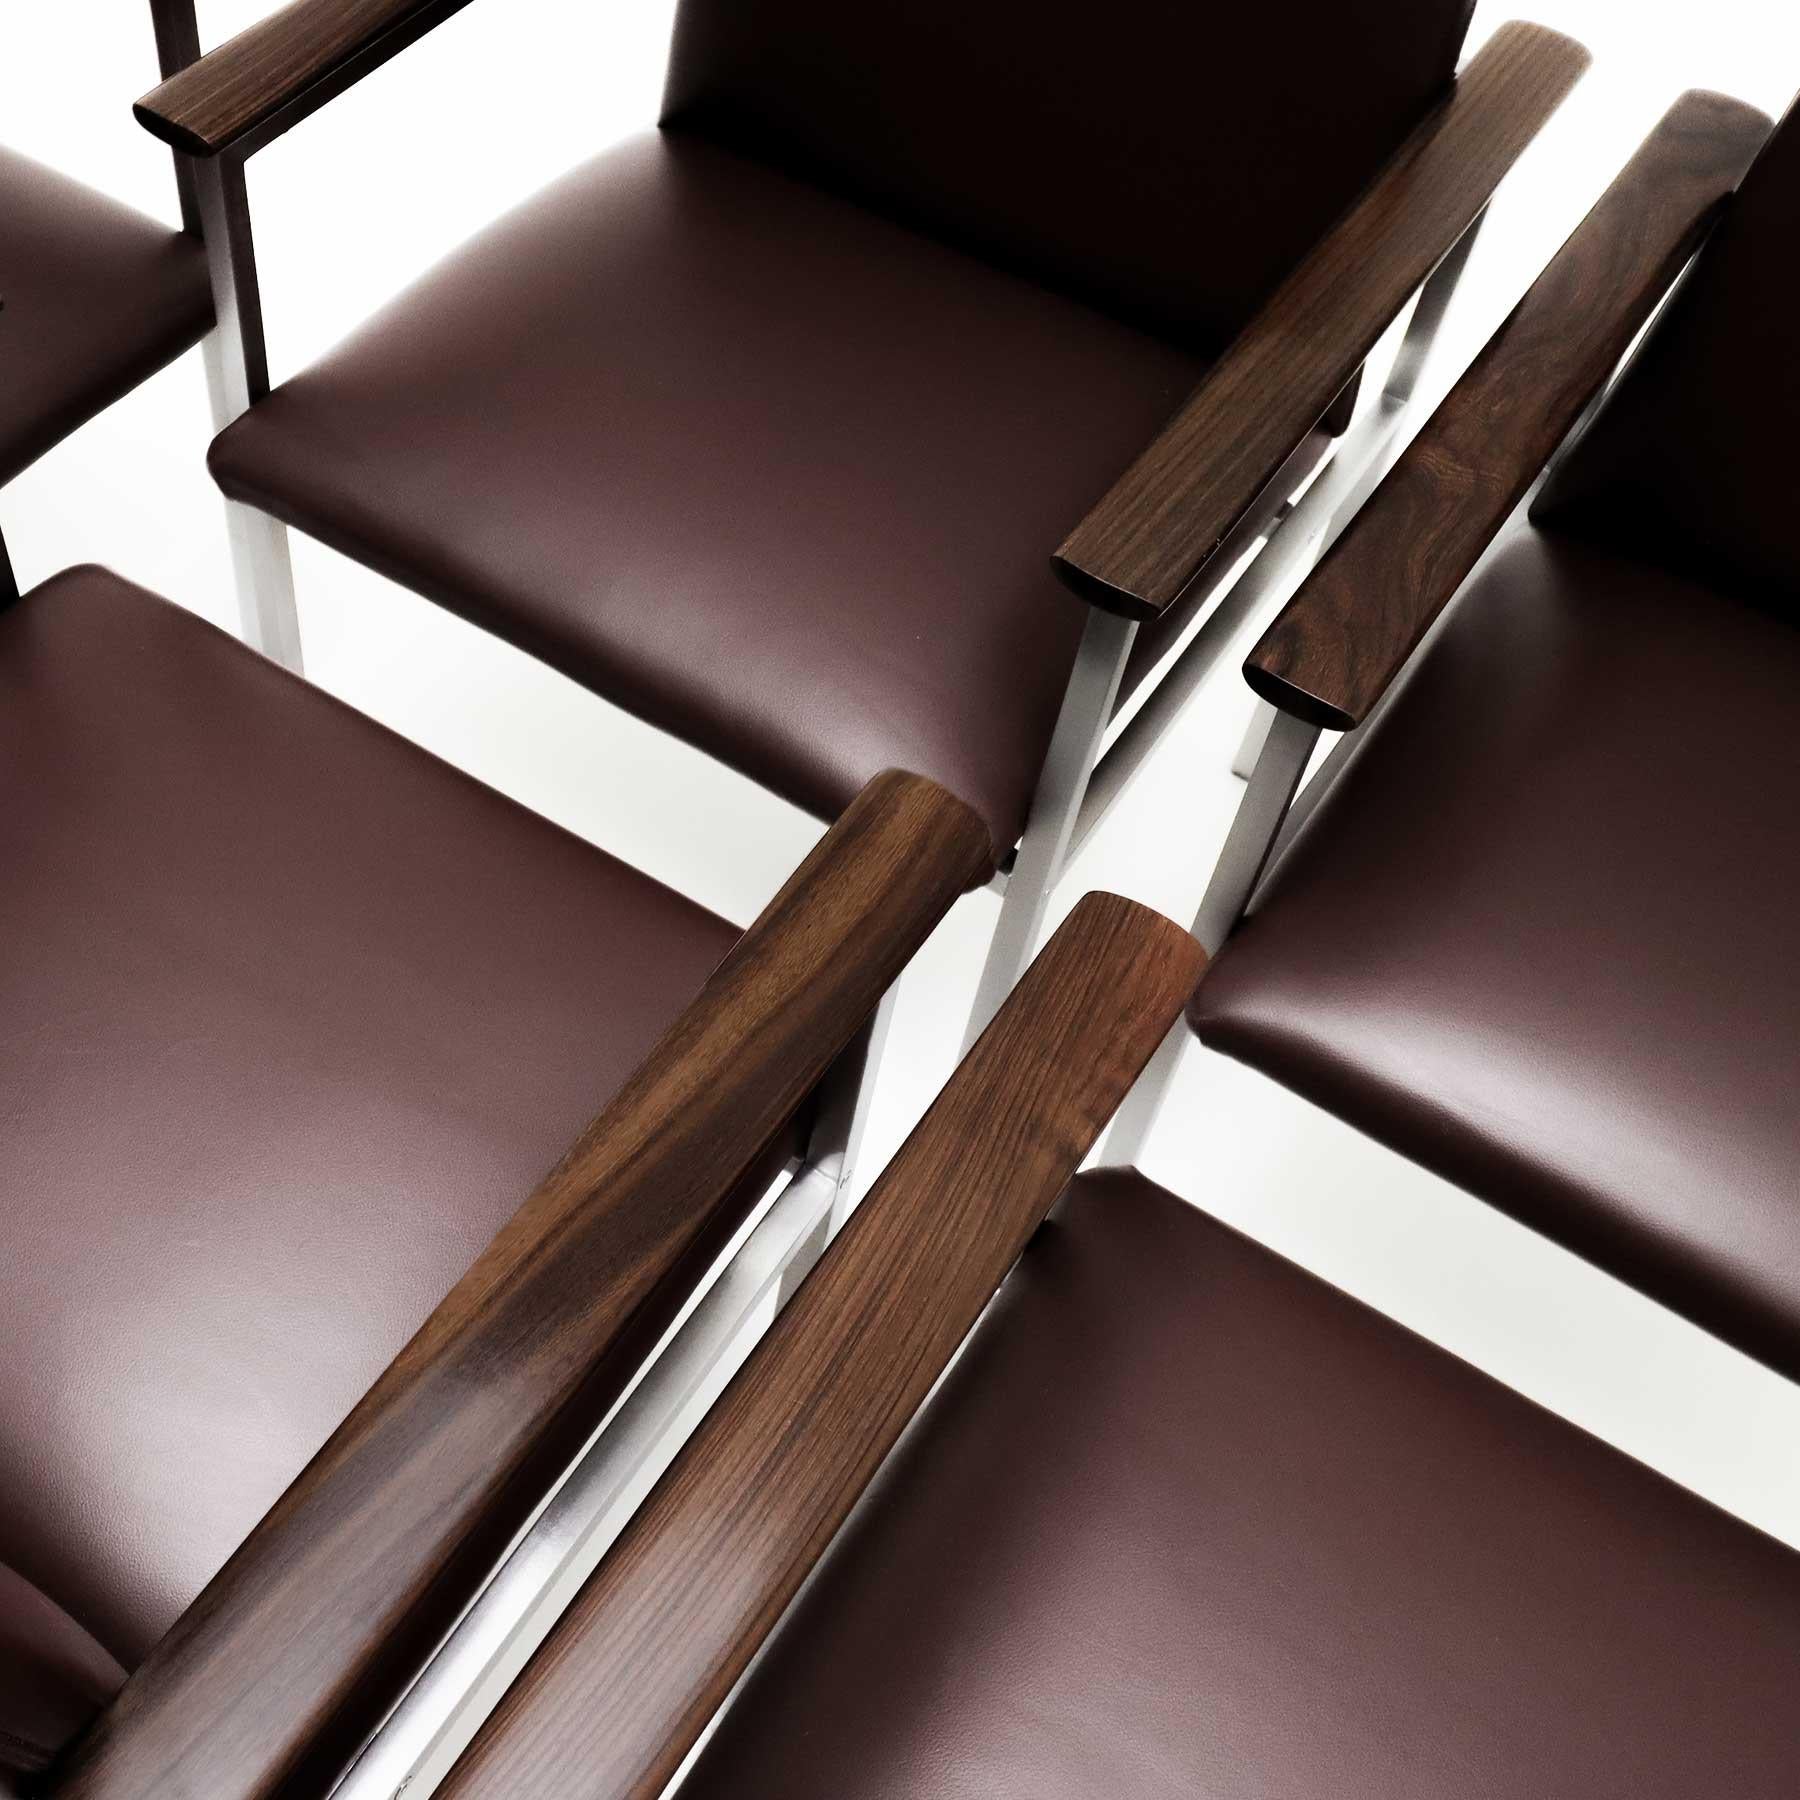 6 Sigvard Bernadotte H-line chairs in brushed steel, Walnut and leather For Sale 1